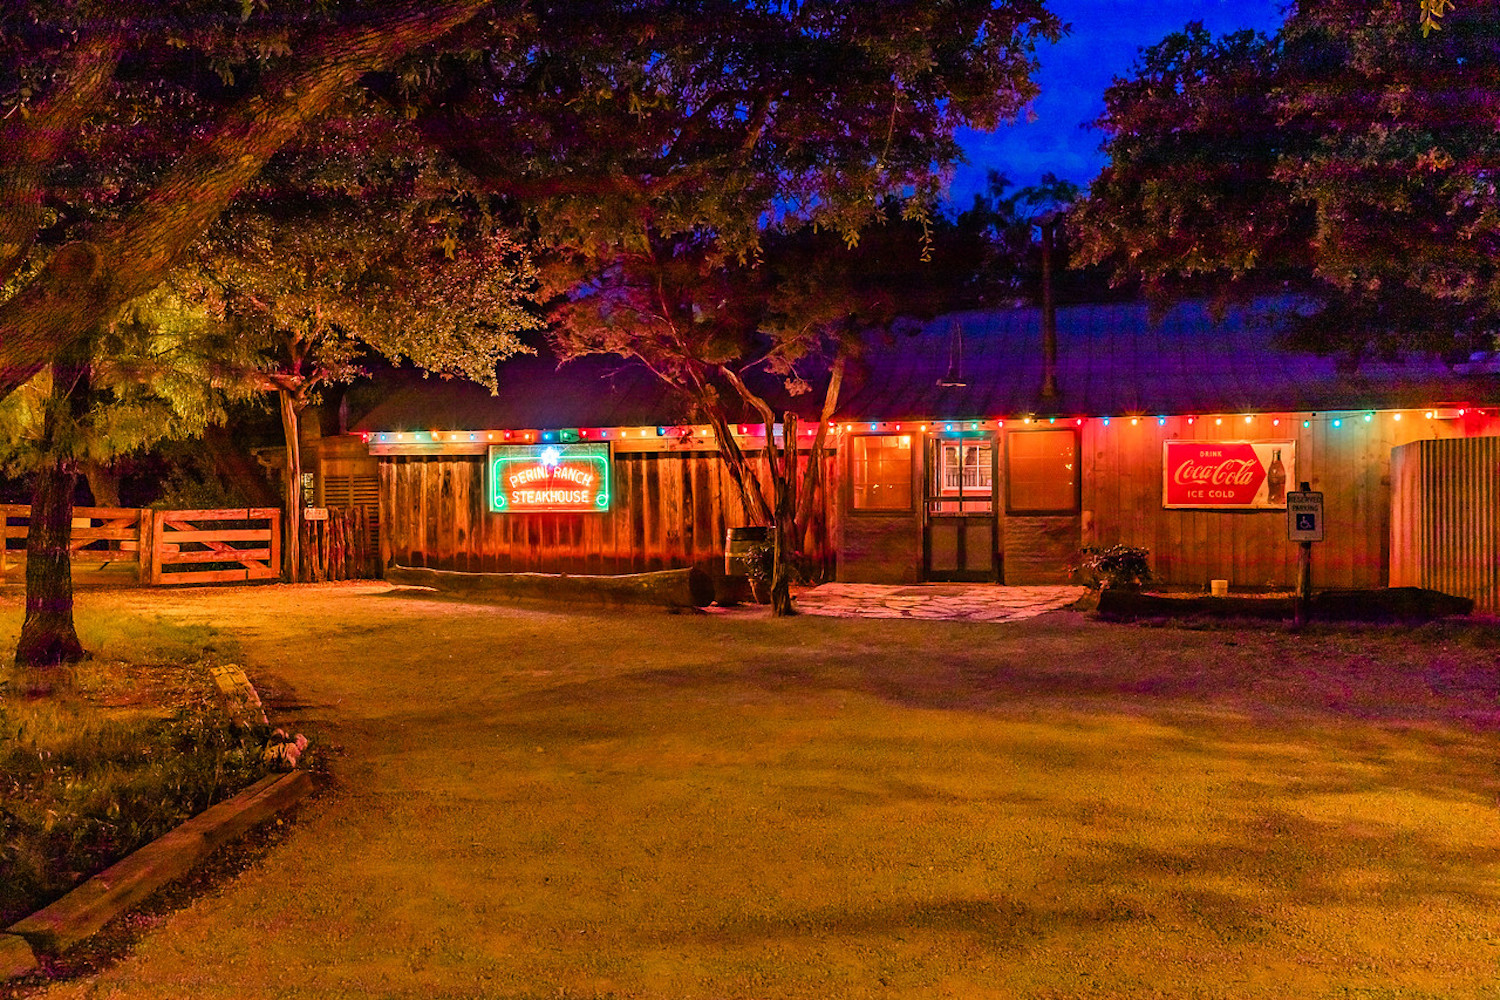 The outside of Perini Ranch at nighttime.